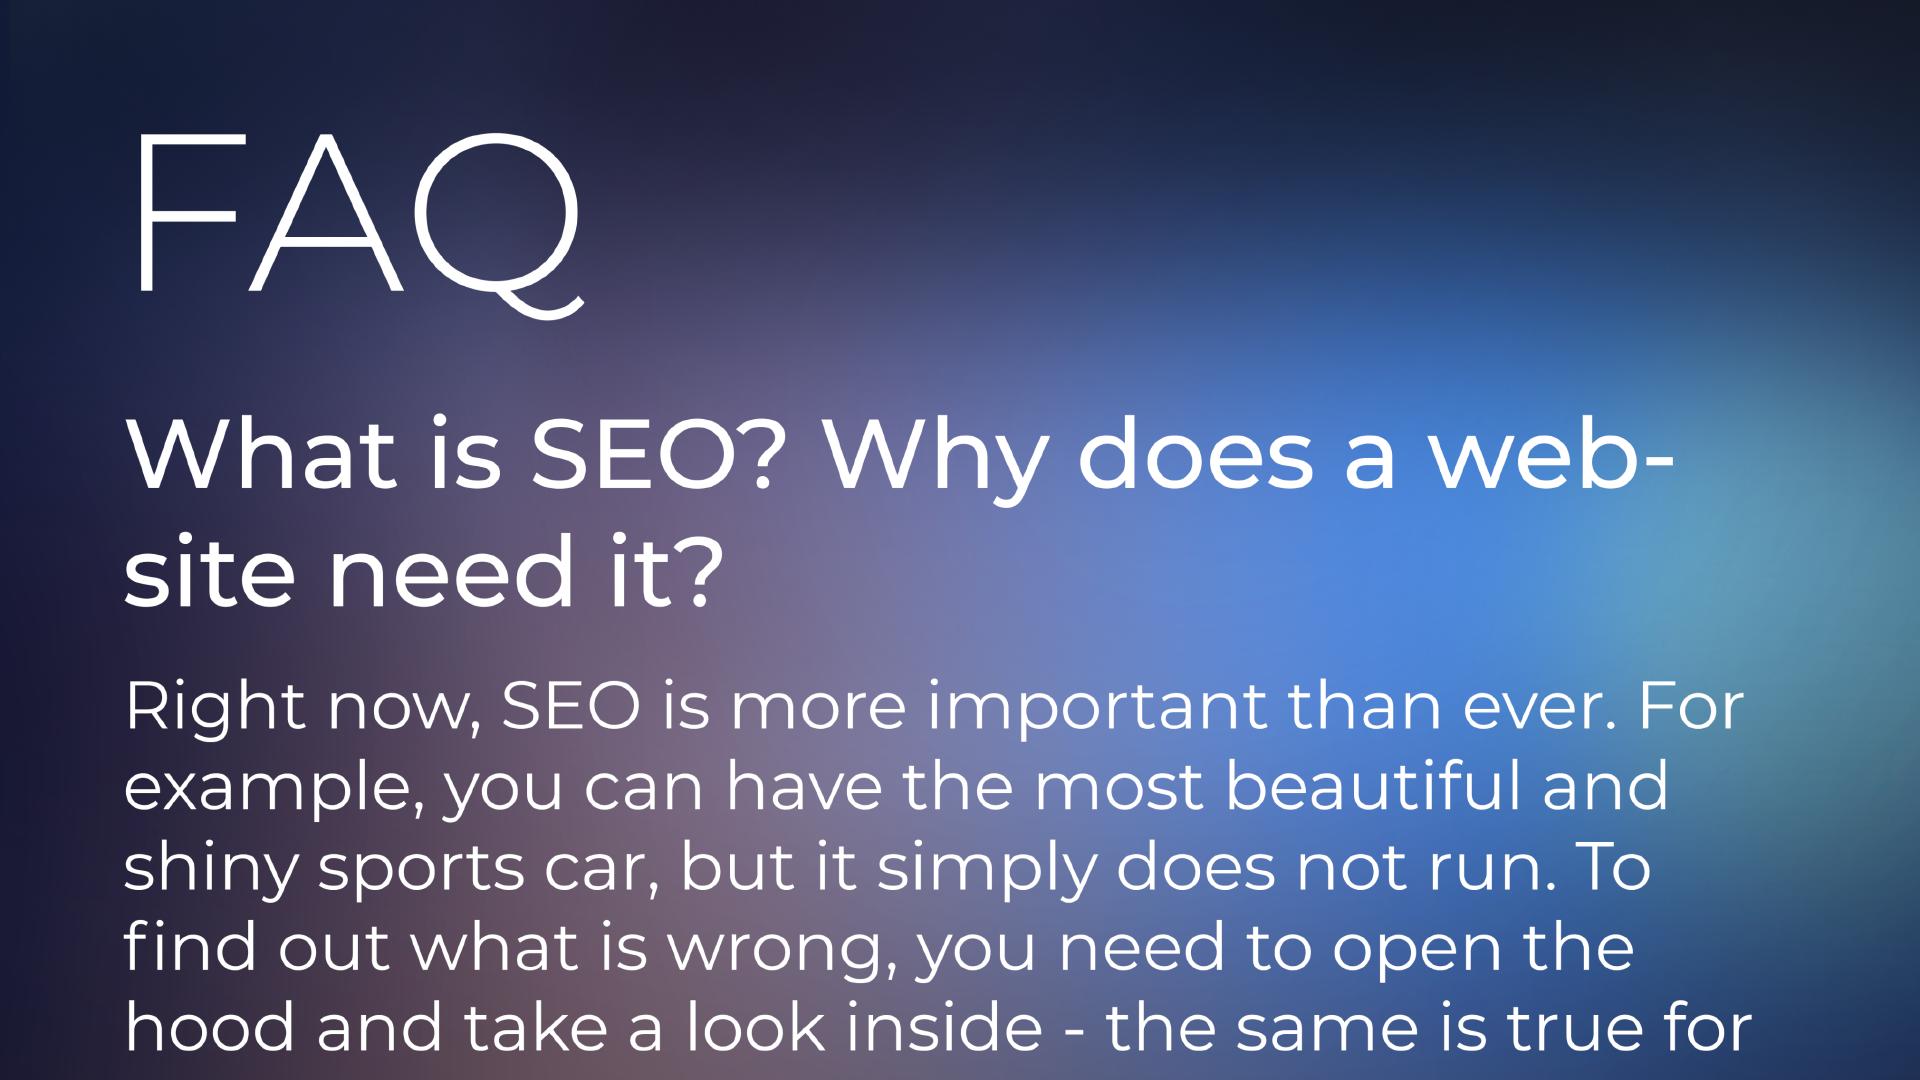 FAQ section. What is SEO? Why does a website need it? | Right now, SEO is more important than ever. For example, you can have the most beautiful and shiny sports car, but it simply does not run. To find out what is wrong, you need to open the hood and take a look inside - the same is true for a website's SEO. You can have the best product or website in the world, but if your website has critical SEO issues, then unfortunately all your efforts will be wasted and no one will ever be able to find your website in Google or Bing.